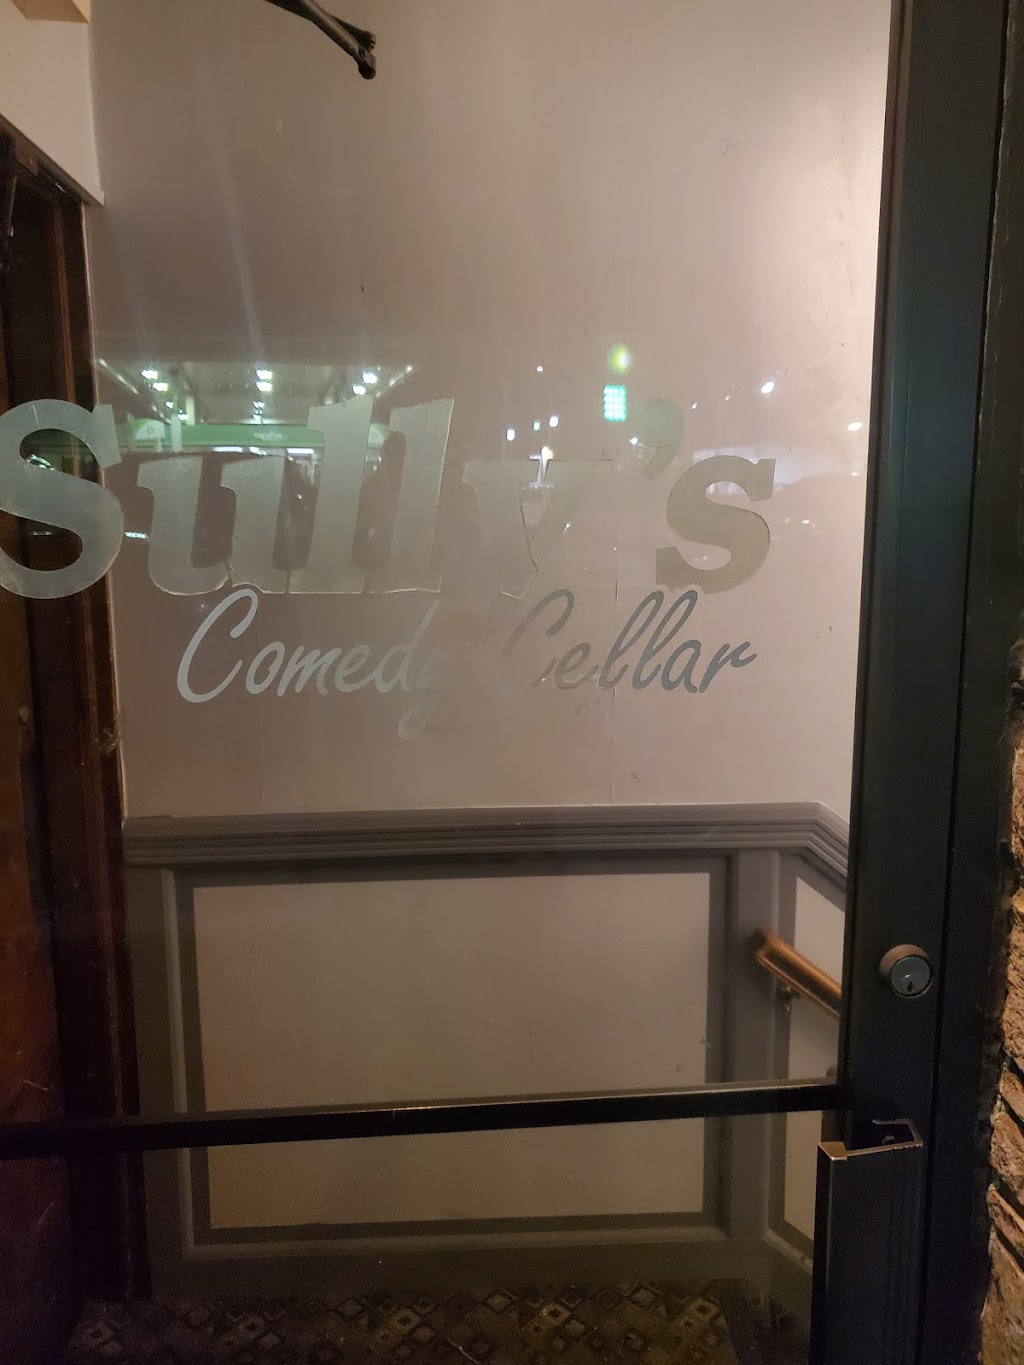 Sullys Comedy Cellar | 9306 Harford Rd, Parkville, MD 21234 | Phone: (410) 665-8600